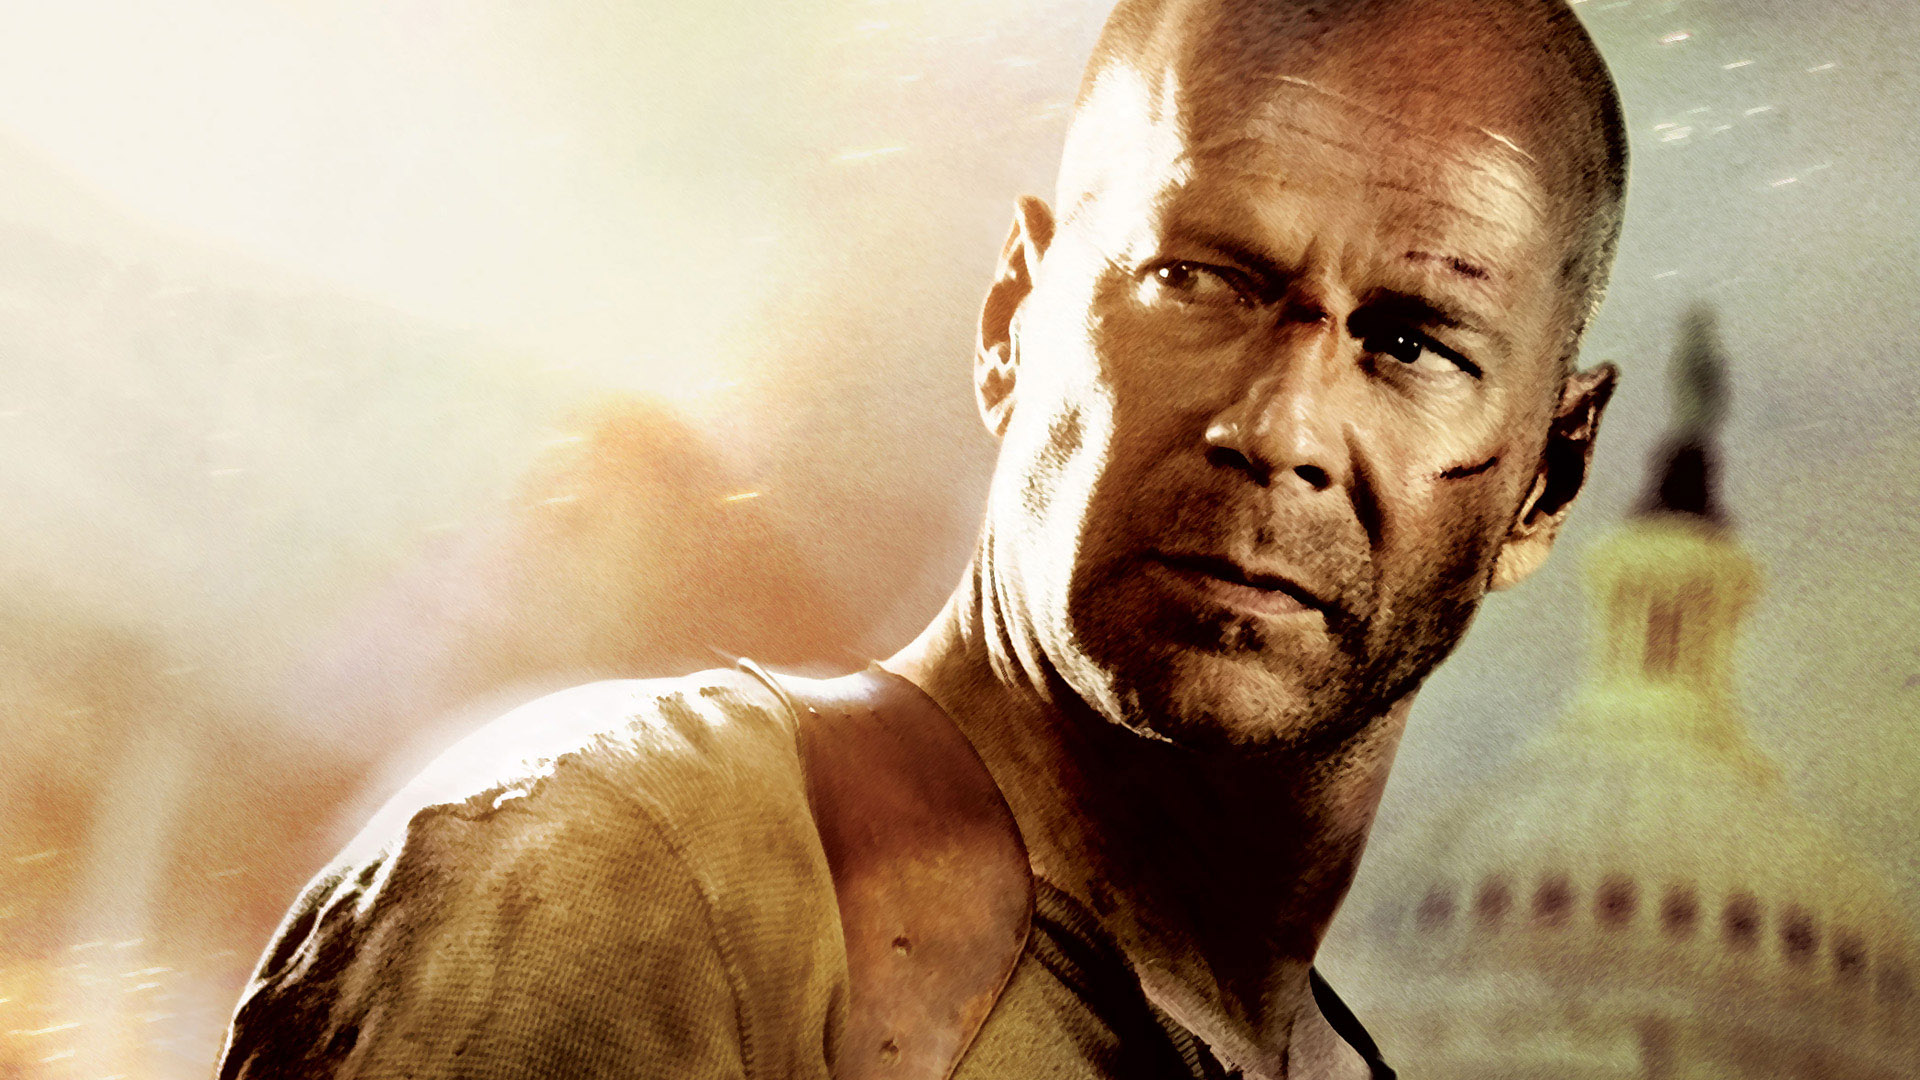 Bruce Willis Wallpapers High Resolution and Quality Download 1920x1080